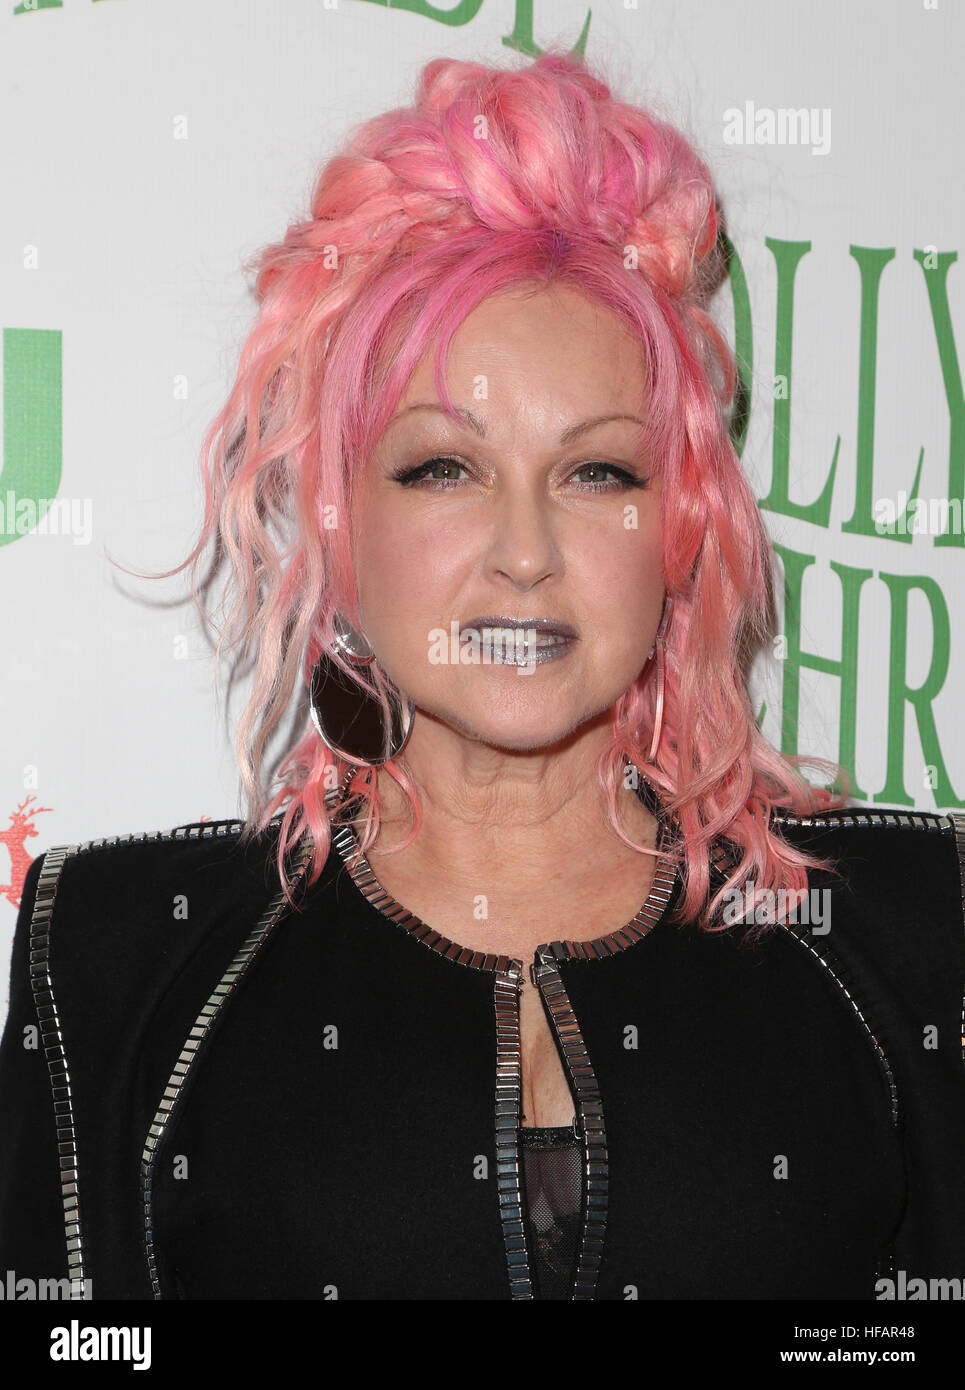 Cyndi Lauper Attending The 85th Annual Hollywood Christmas Parade In Hollywood California 8029